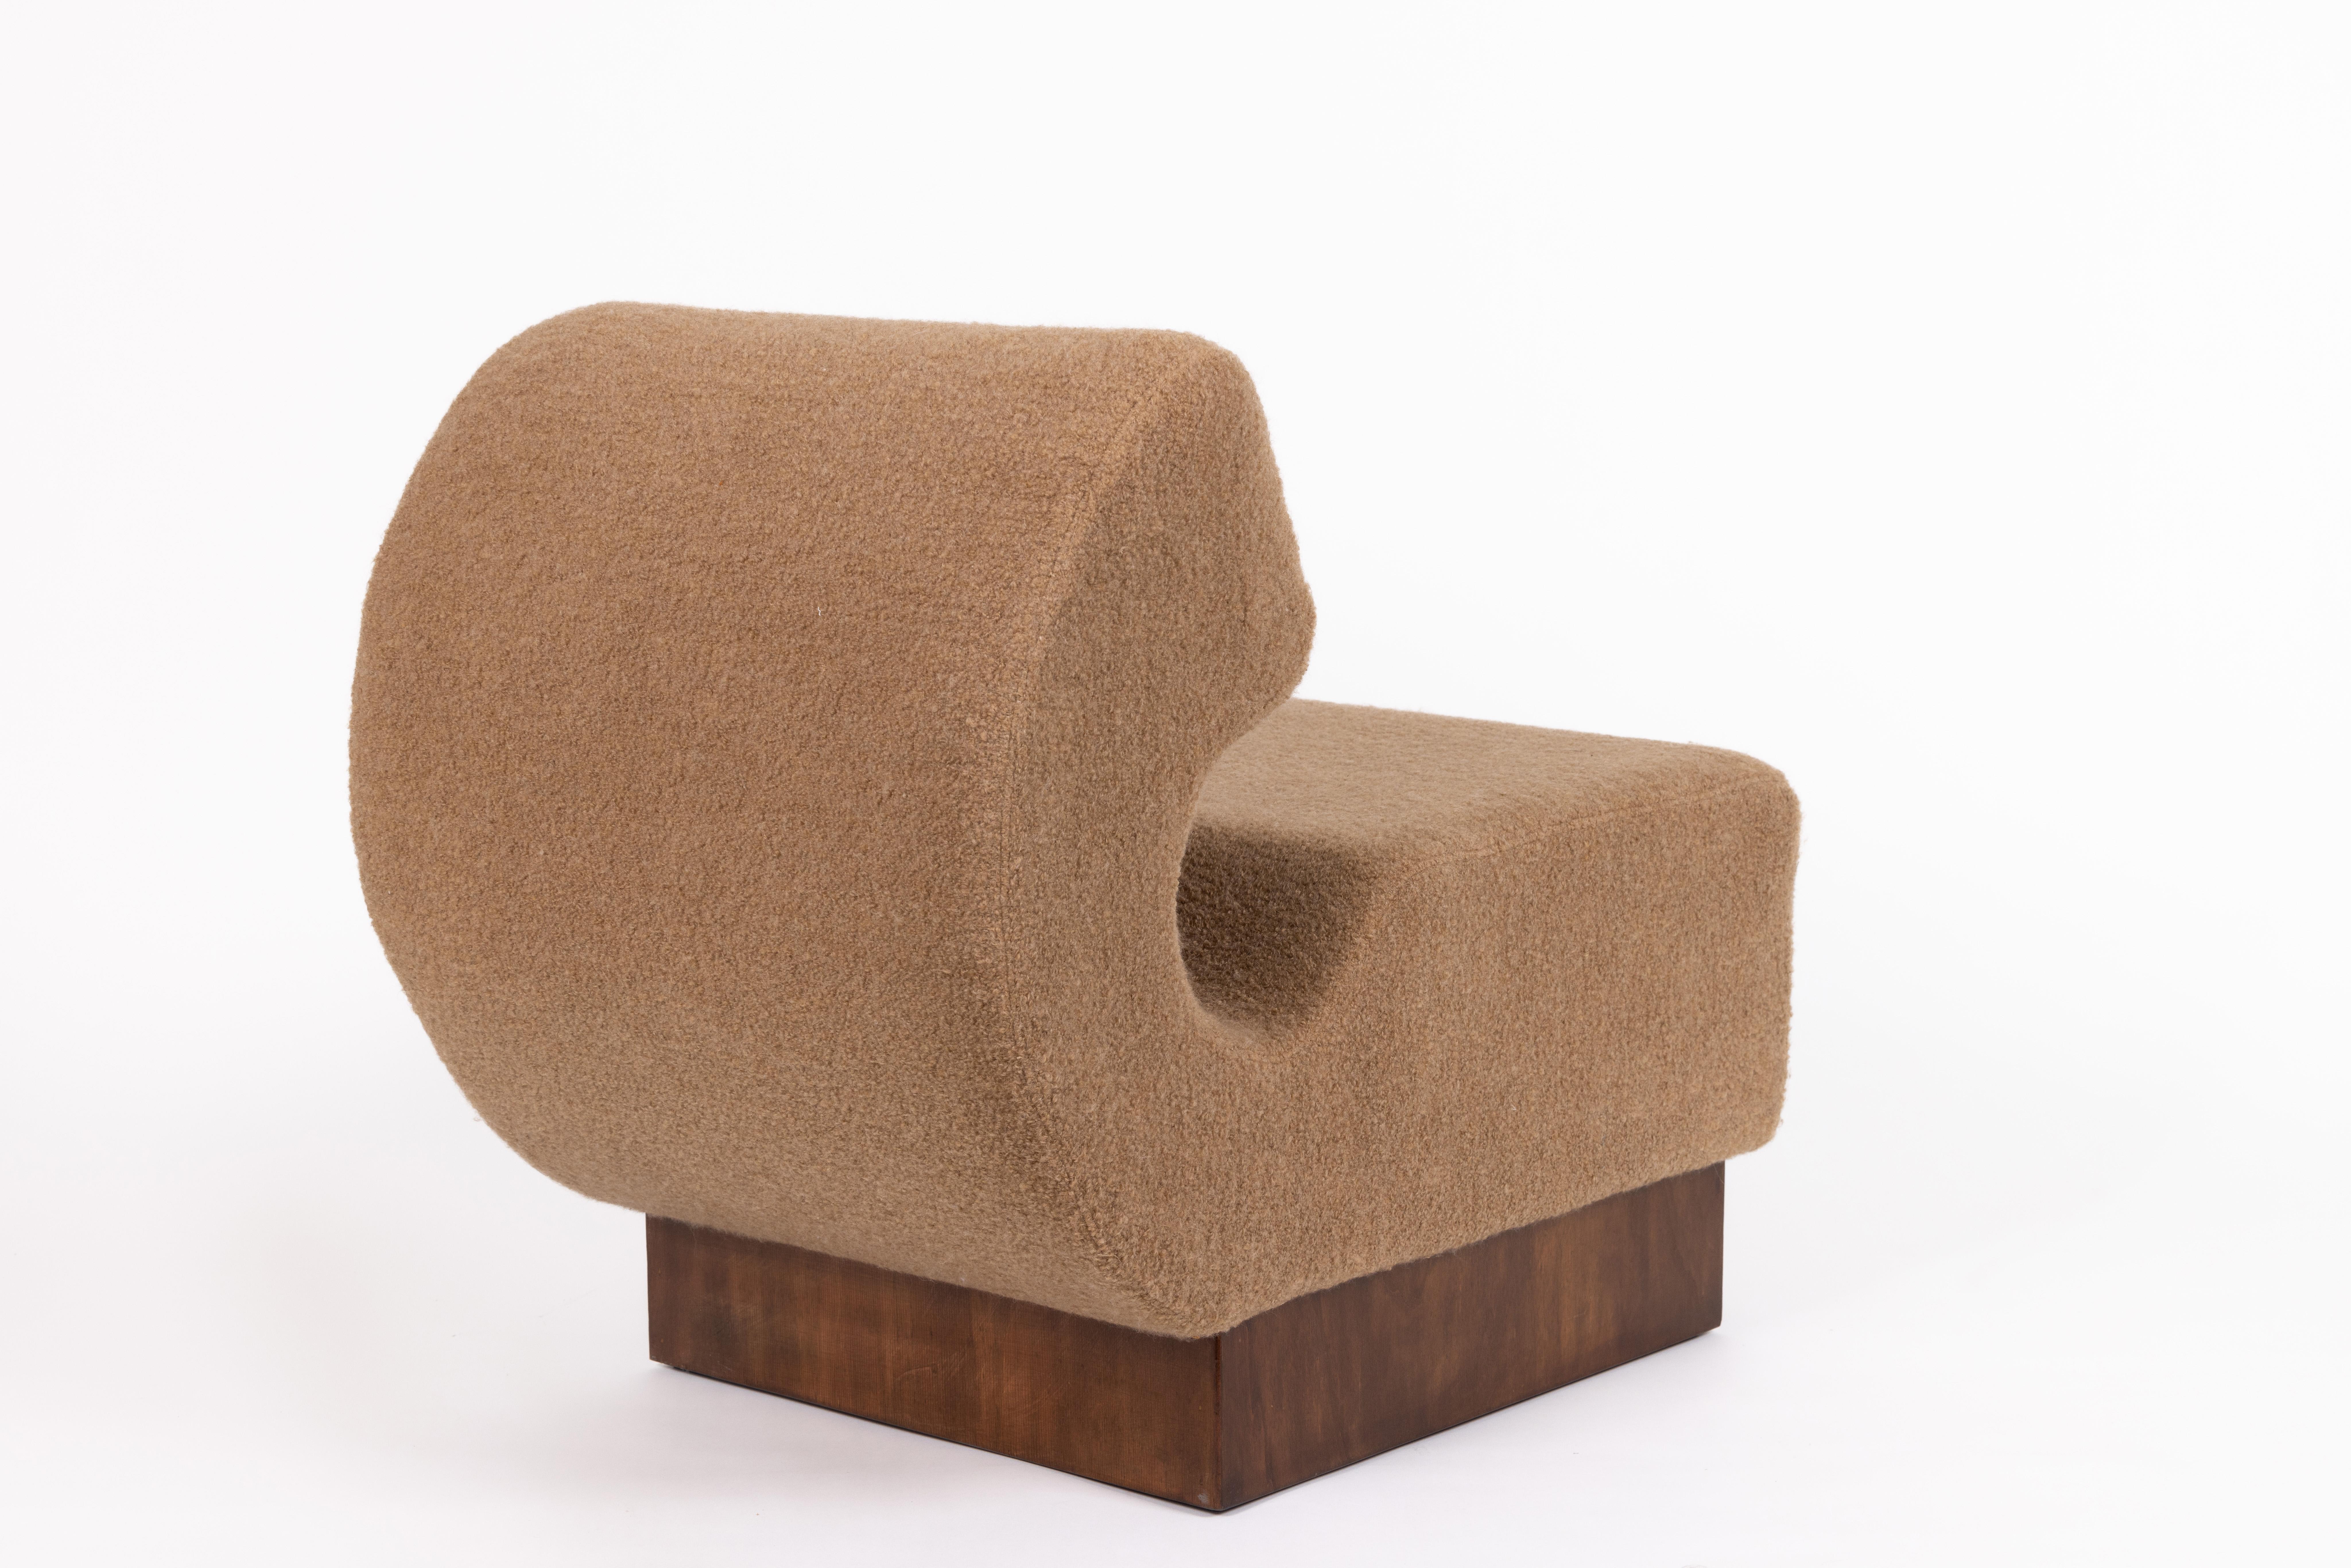 Italian slipper chair, 1970s, entirely restored and reupholstered in cashmere boucle' by Schumacher. Walnut wooden base
